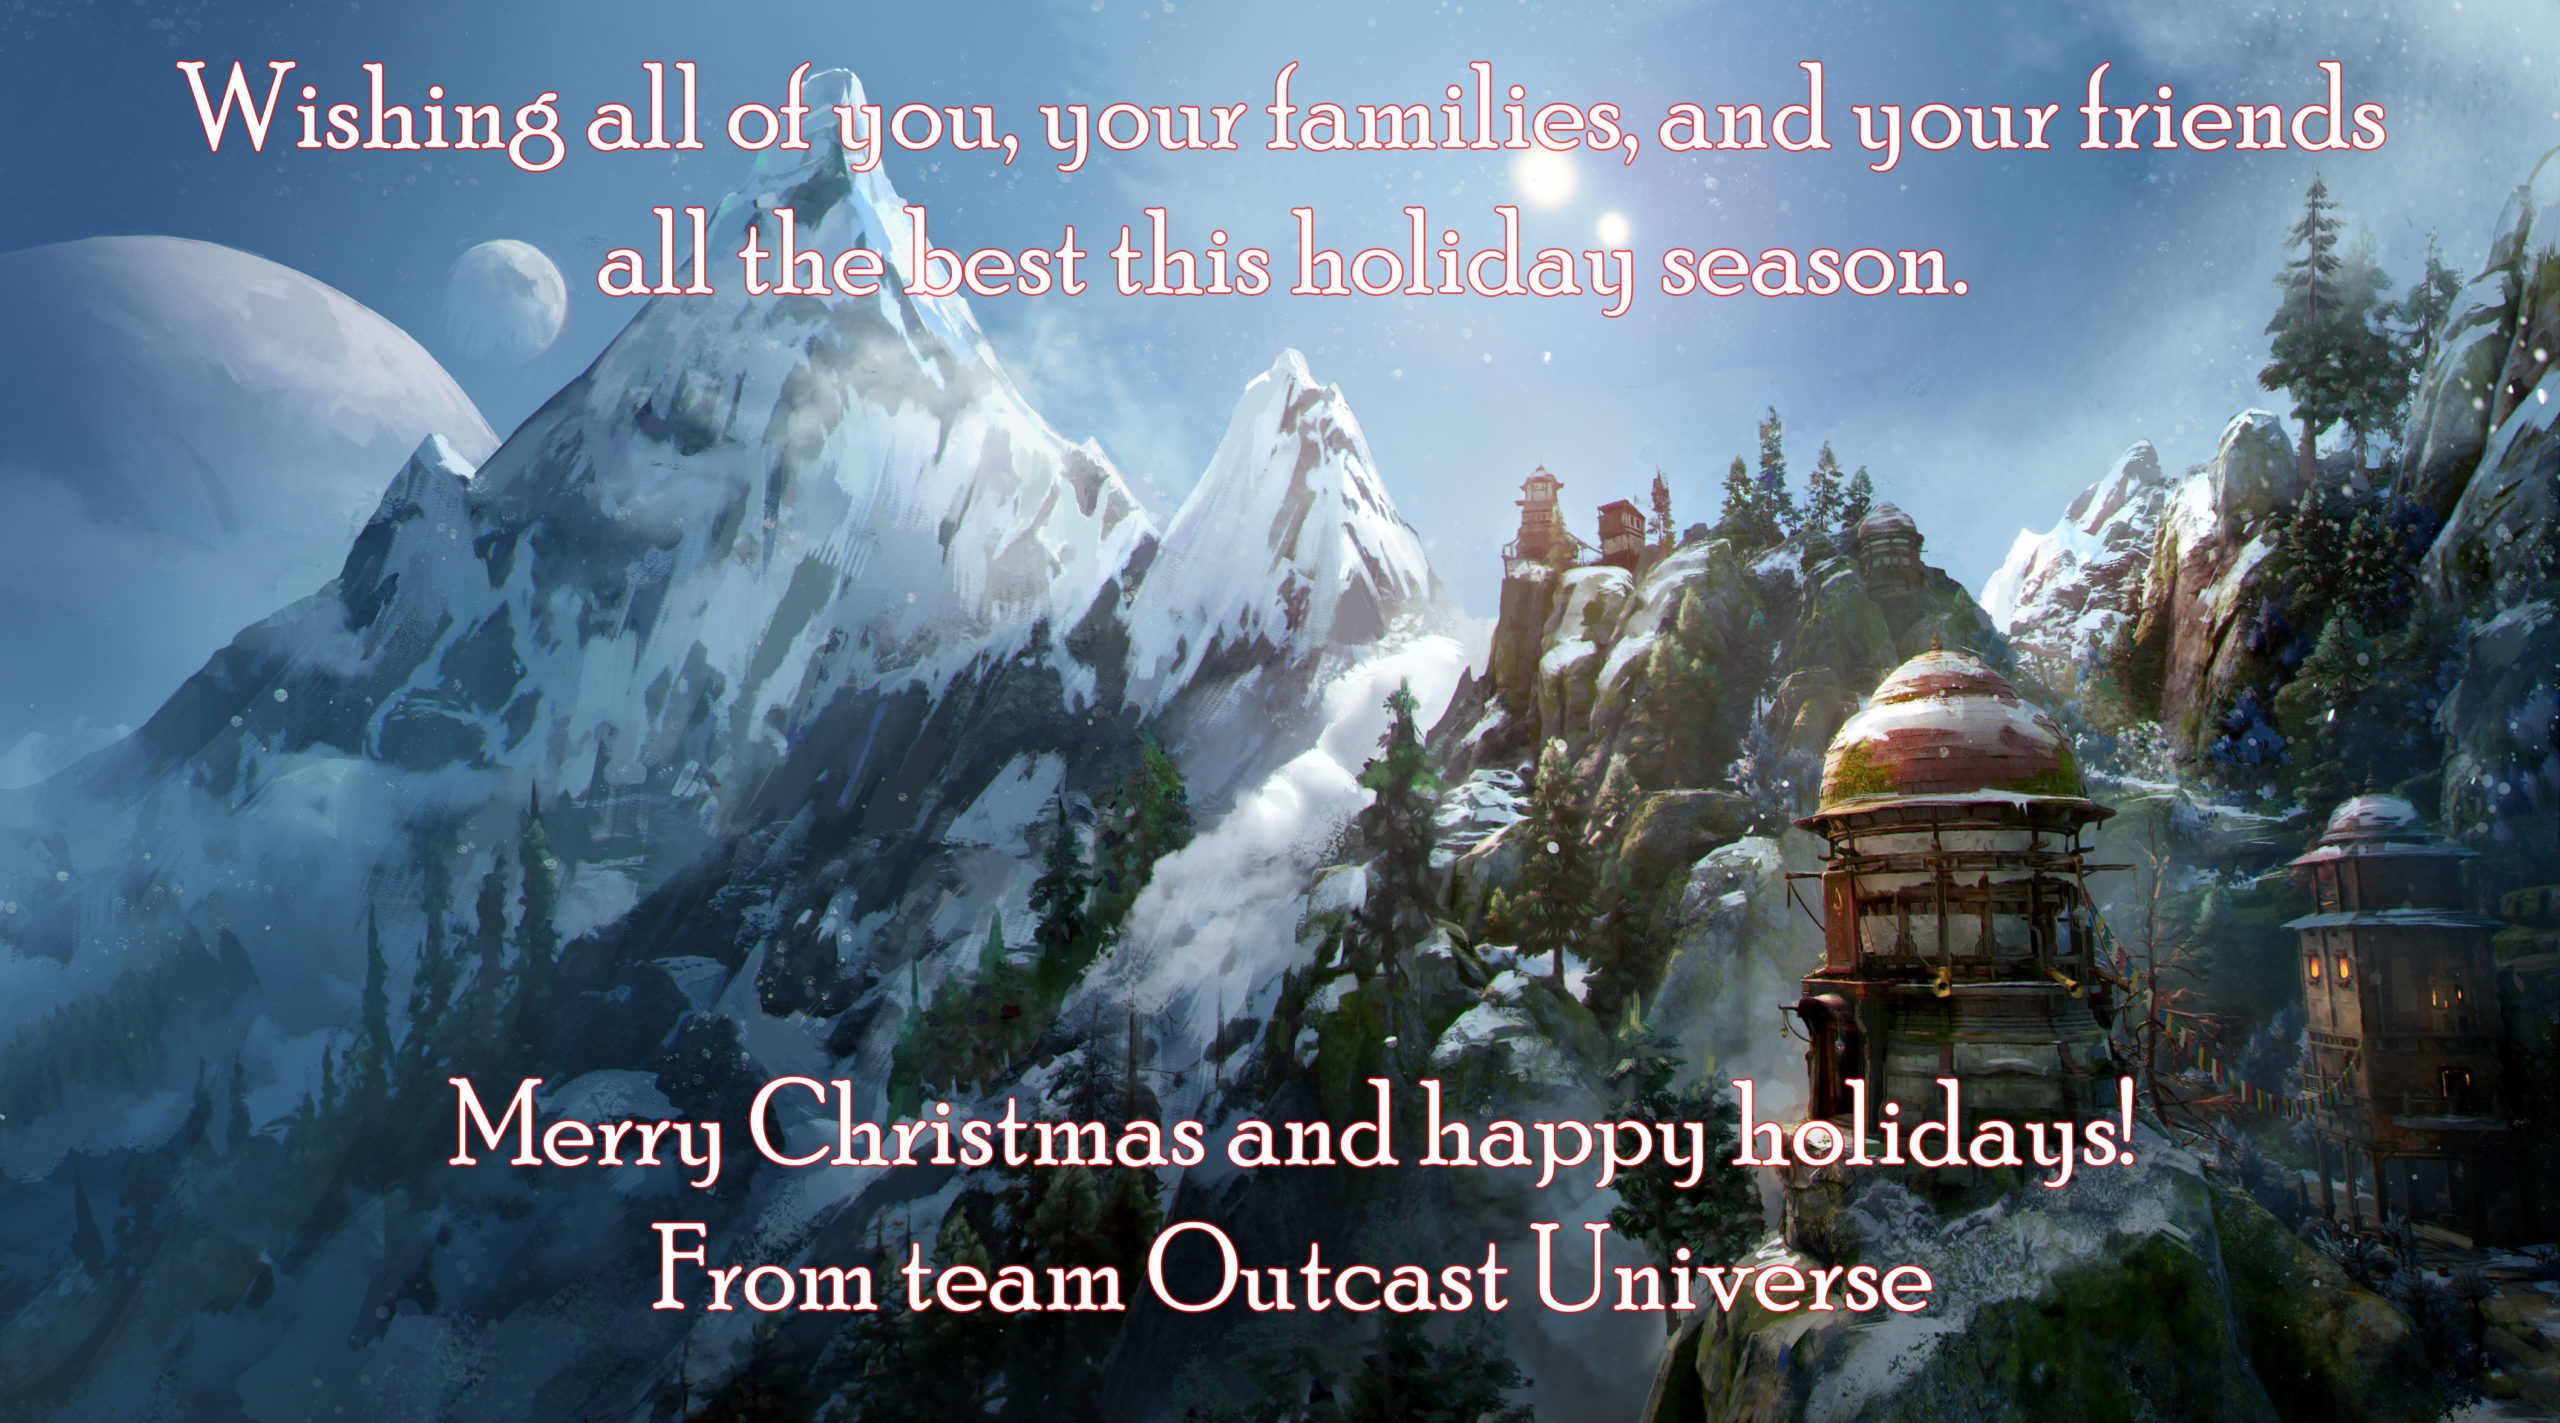 Best wishes and Happy Holidays from team Outcast Universe!